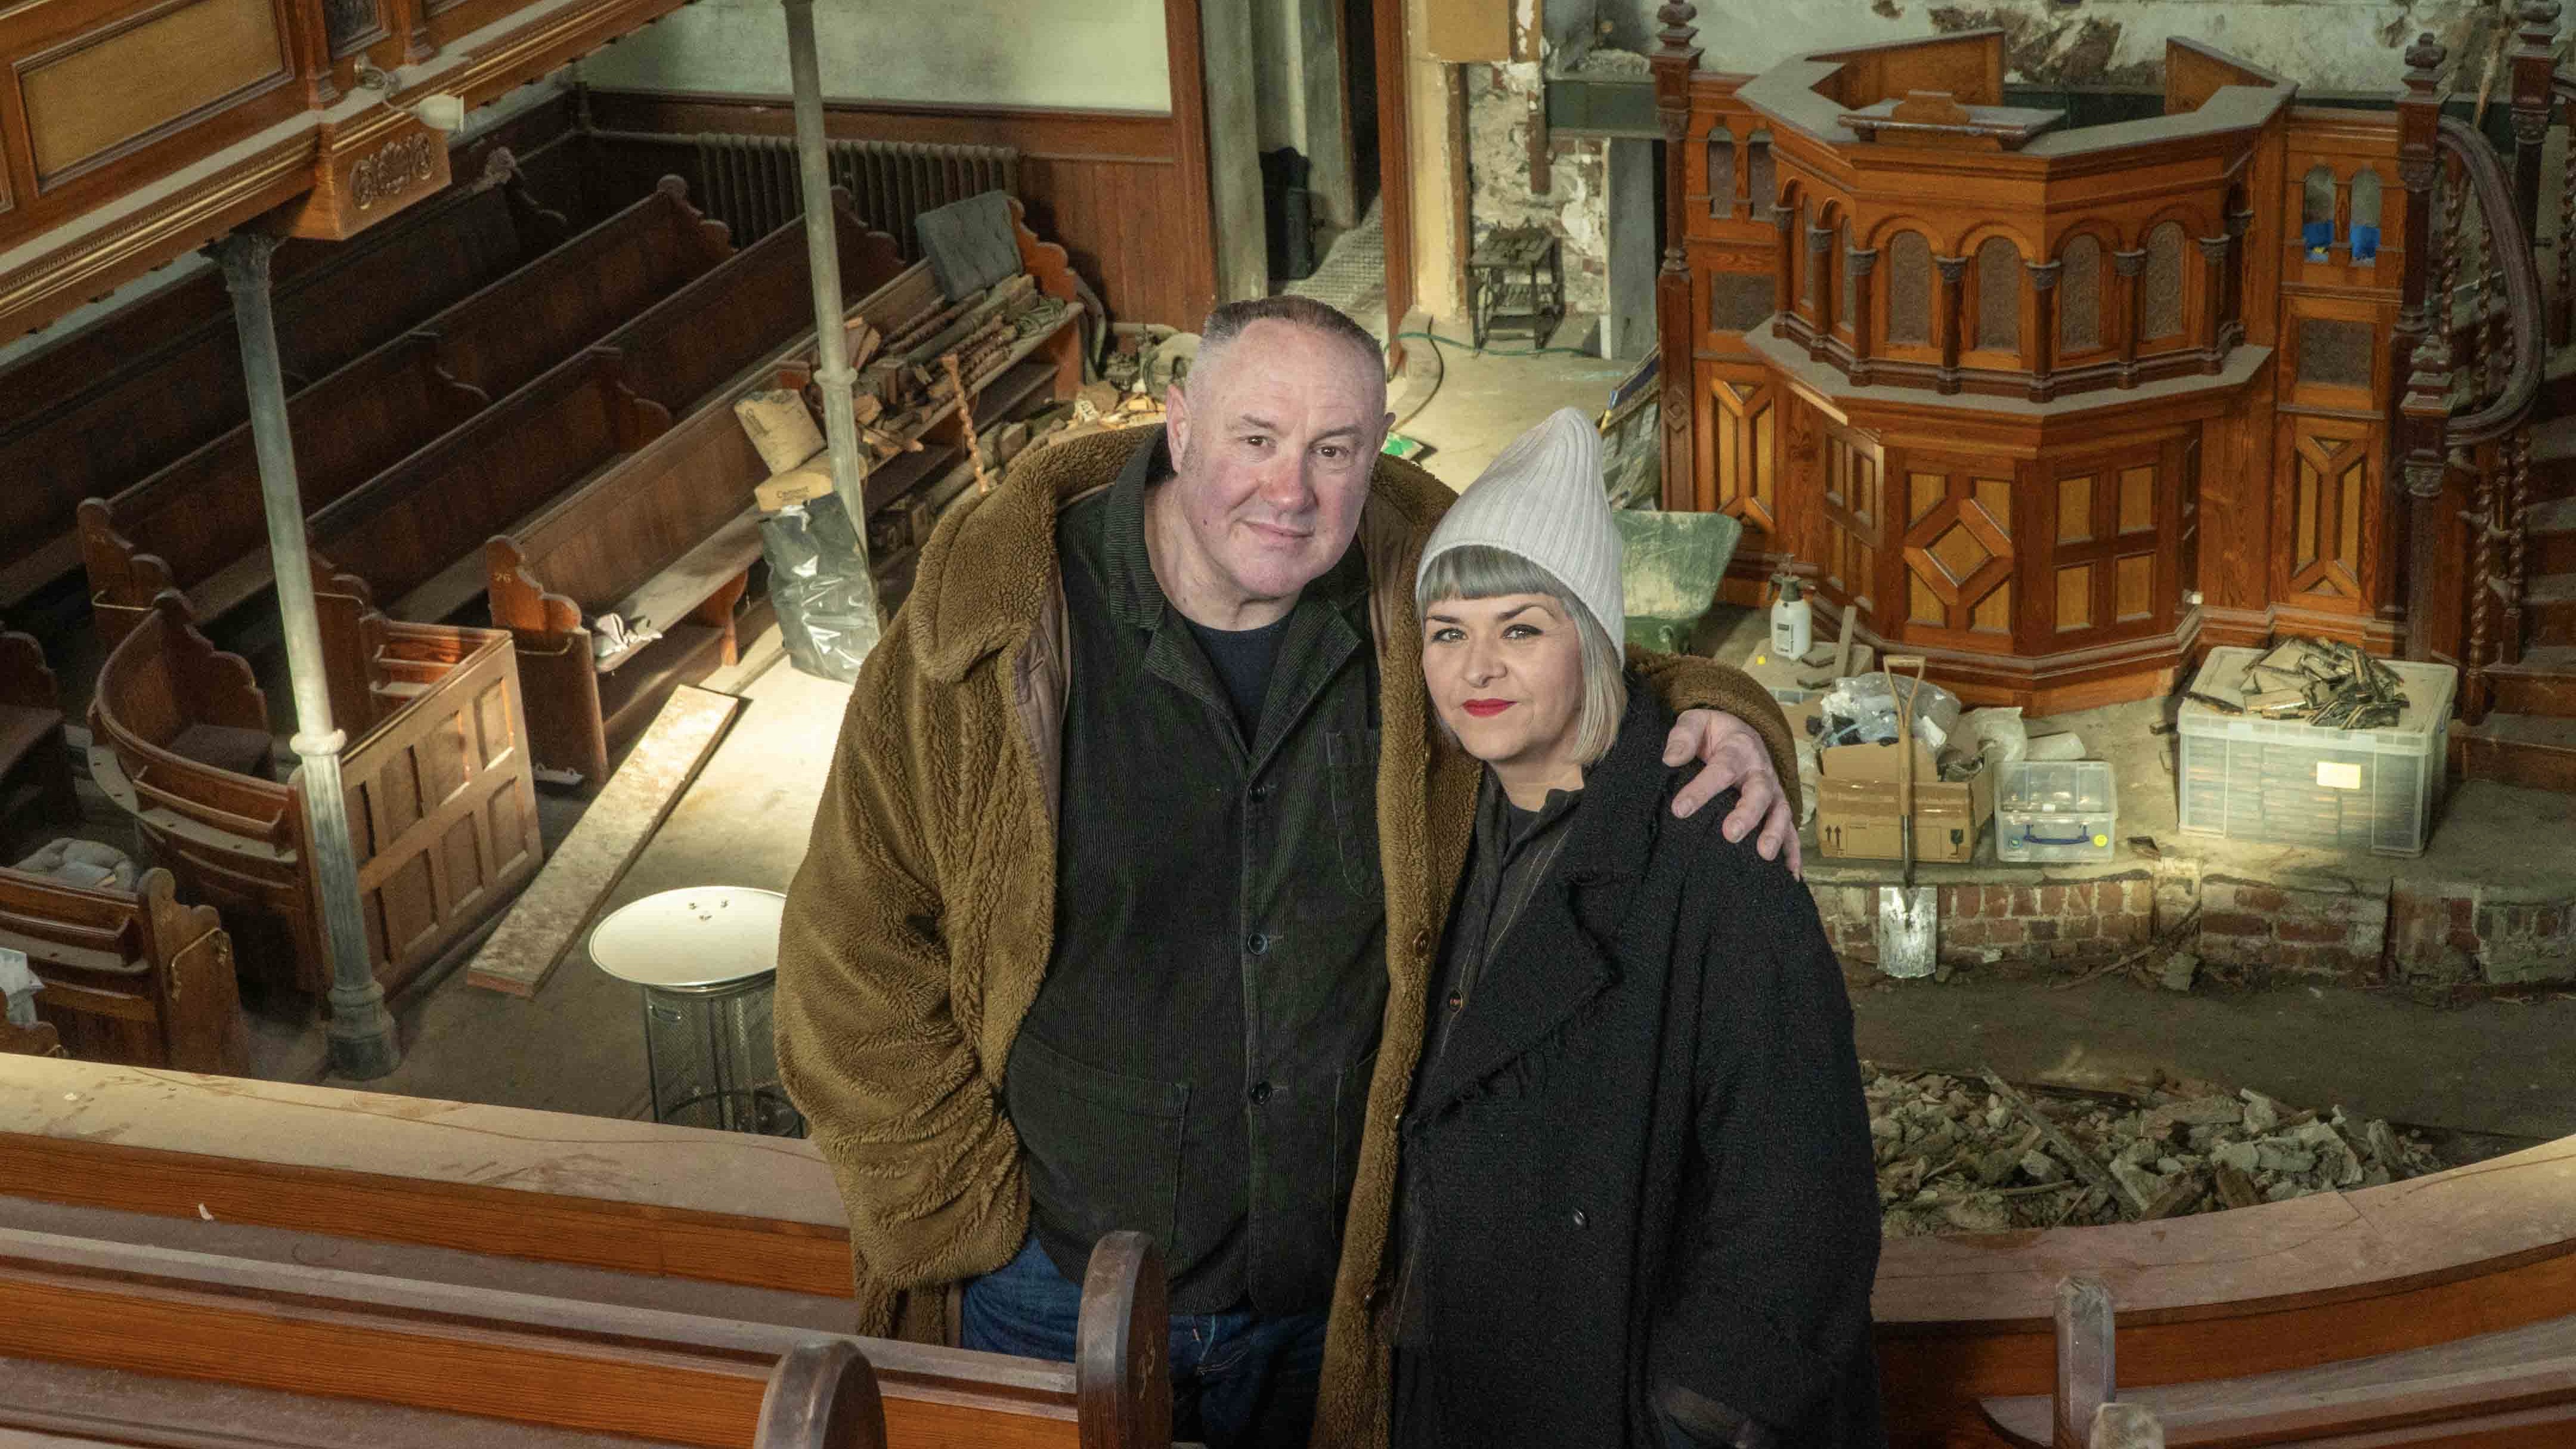 Keith Brymer Jones and Marj Hogarth in warm coats stand against a backdrop of their chapel complete with pulpit in Our Welsh Chapel Dream